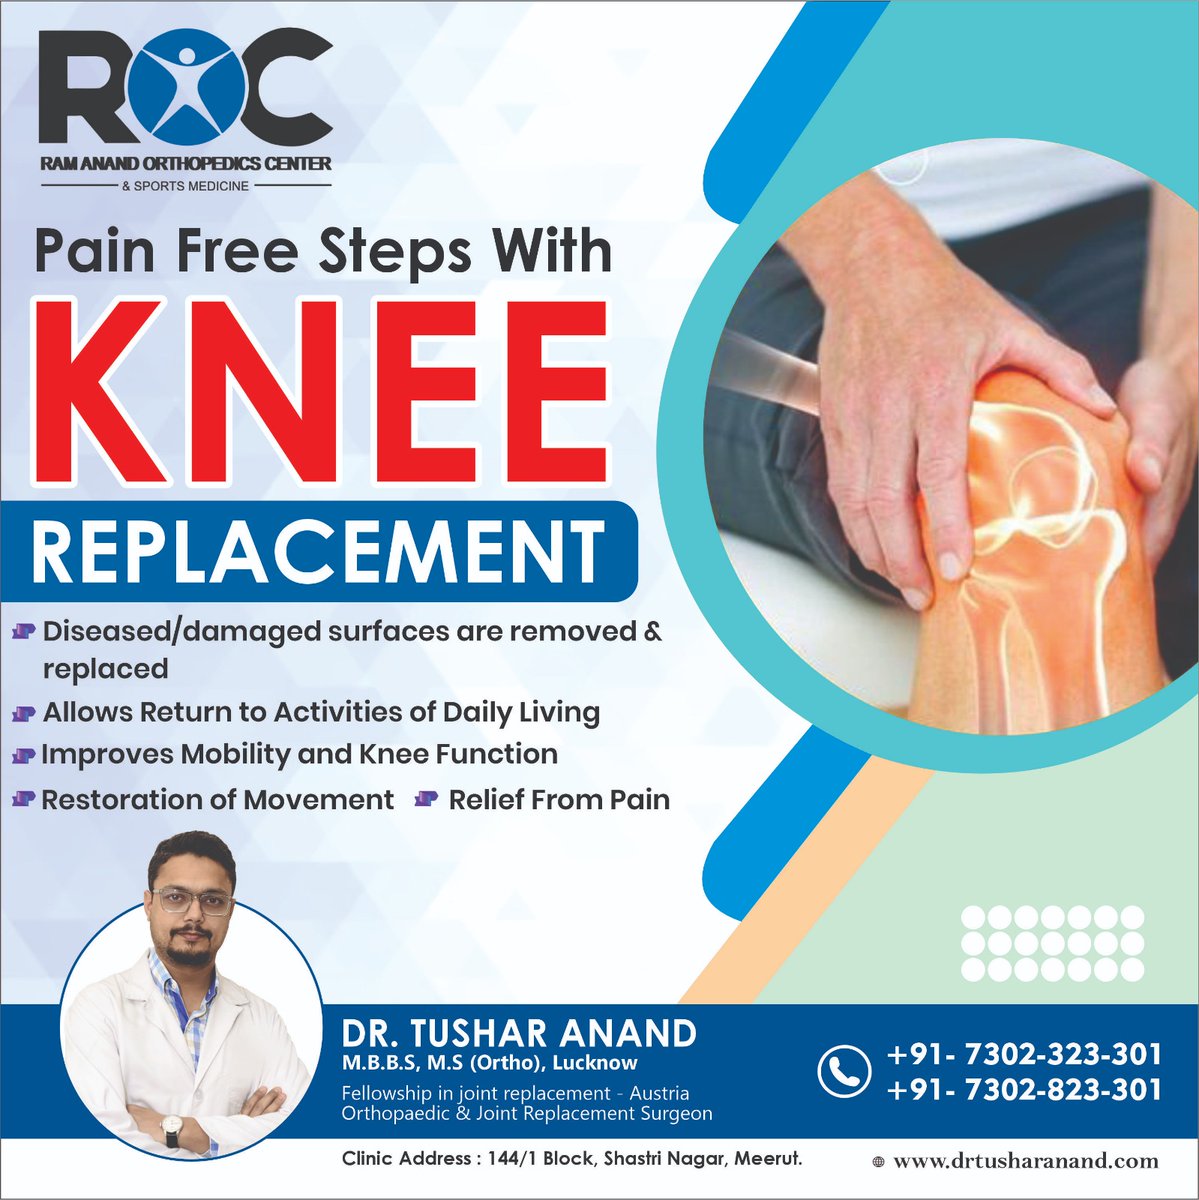 Pain Free Steps With KNEE REPLACEMENT
.
.
🌐 𝐯𝐢𝐬𝐢𝐭 𝐨𝐮𝐫 𝐰𝐞𝐛𝐬𝐢𝐭𝐞: 𝐰𝐰𝐰.𝐝𝐫𝐭𝐮𝐬𝐡𝐚𝐫𝐚𝐧𝐚𝐧𝐝.𝐜𝐨𝐦
📞 𝐟𝐨𝐫 𝐦𝐨𝐫𝐞 𝐈𝐧𝐪𝐮𝐢𝐫𝐢𝐞𝐬: 𝟎𝟕𝟑𝟎𝟐-𝟑𝟐𝟑-𝟑𝟎𝟏, 
.
#drtusharanand #orthopeadic #orthopeadicsurgeon #cervicalspine #cervicalpain #shoulderpain